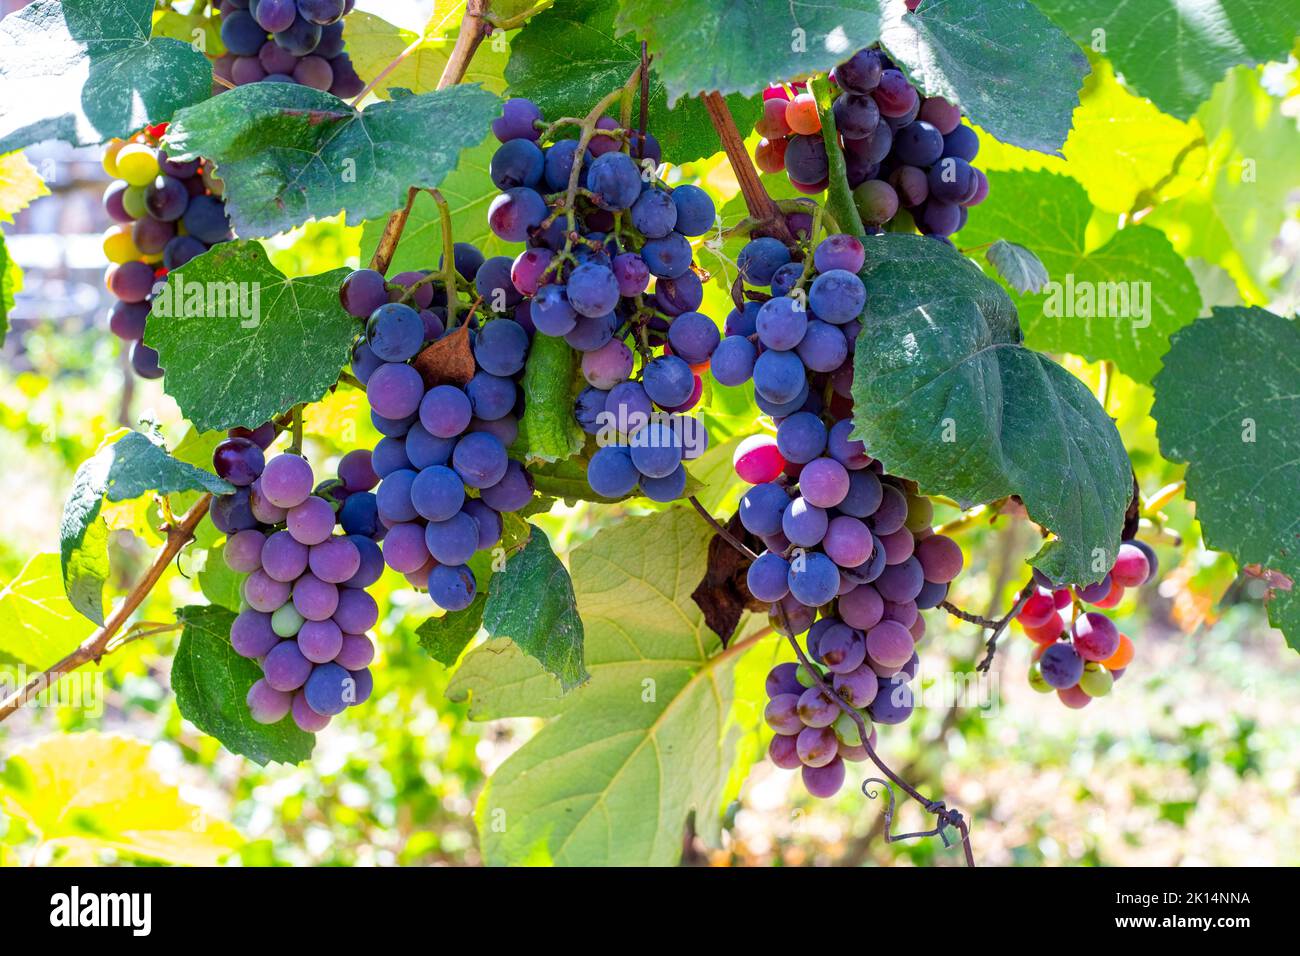 A bunch of blue ripe grapes on a vine in a vineyard. Harvest grapes in autumn. Stock Photo